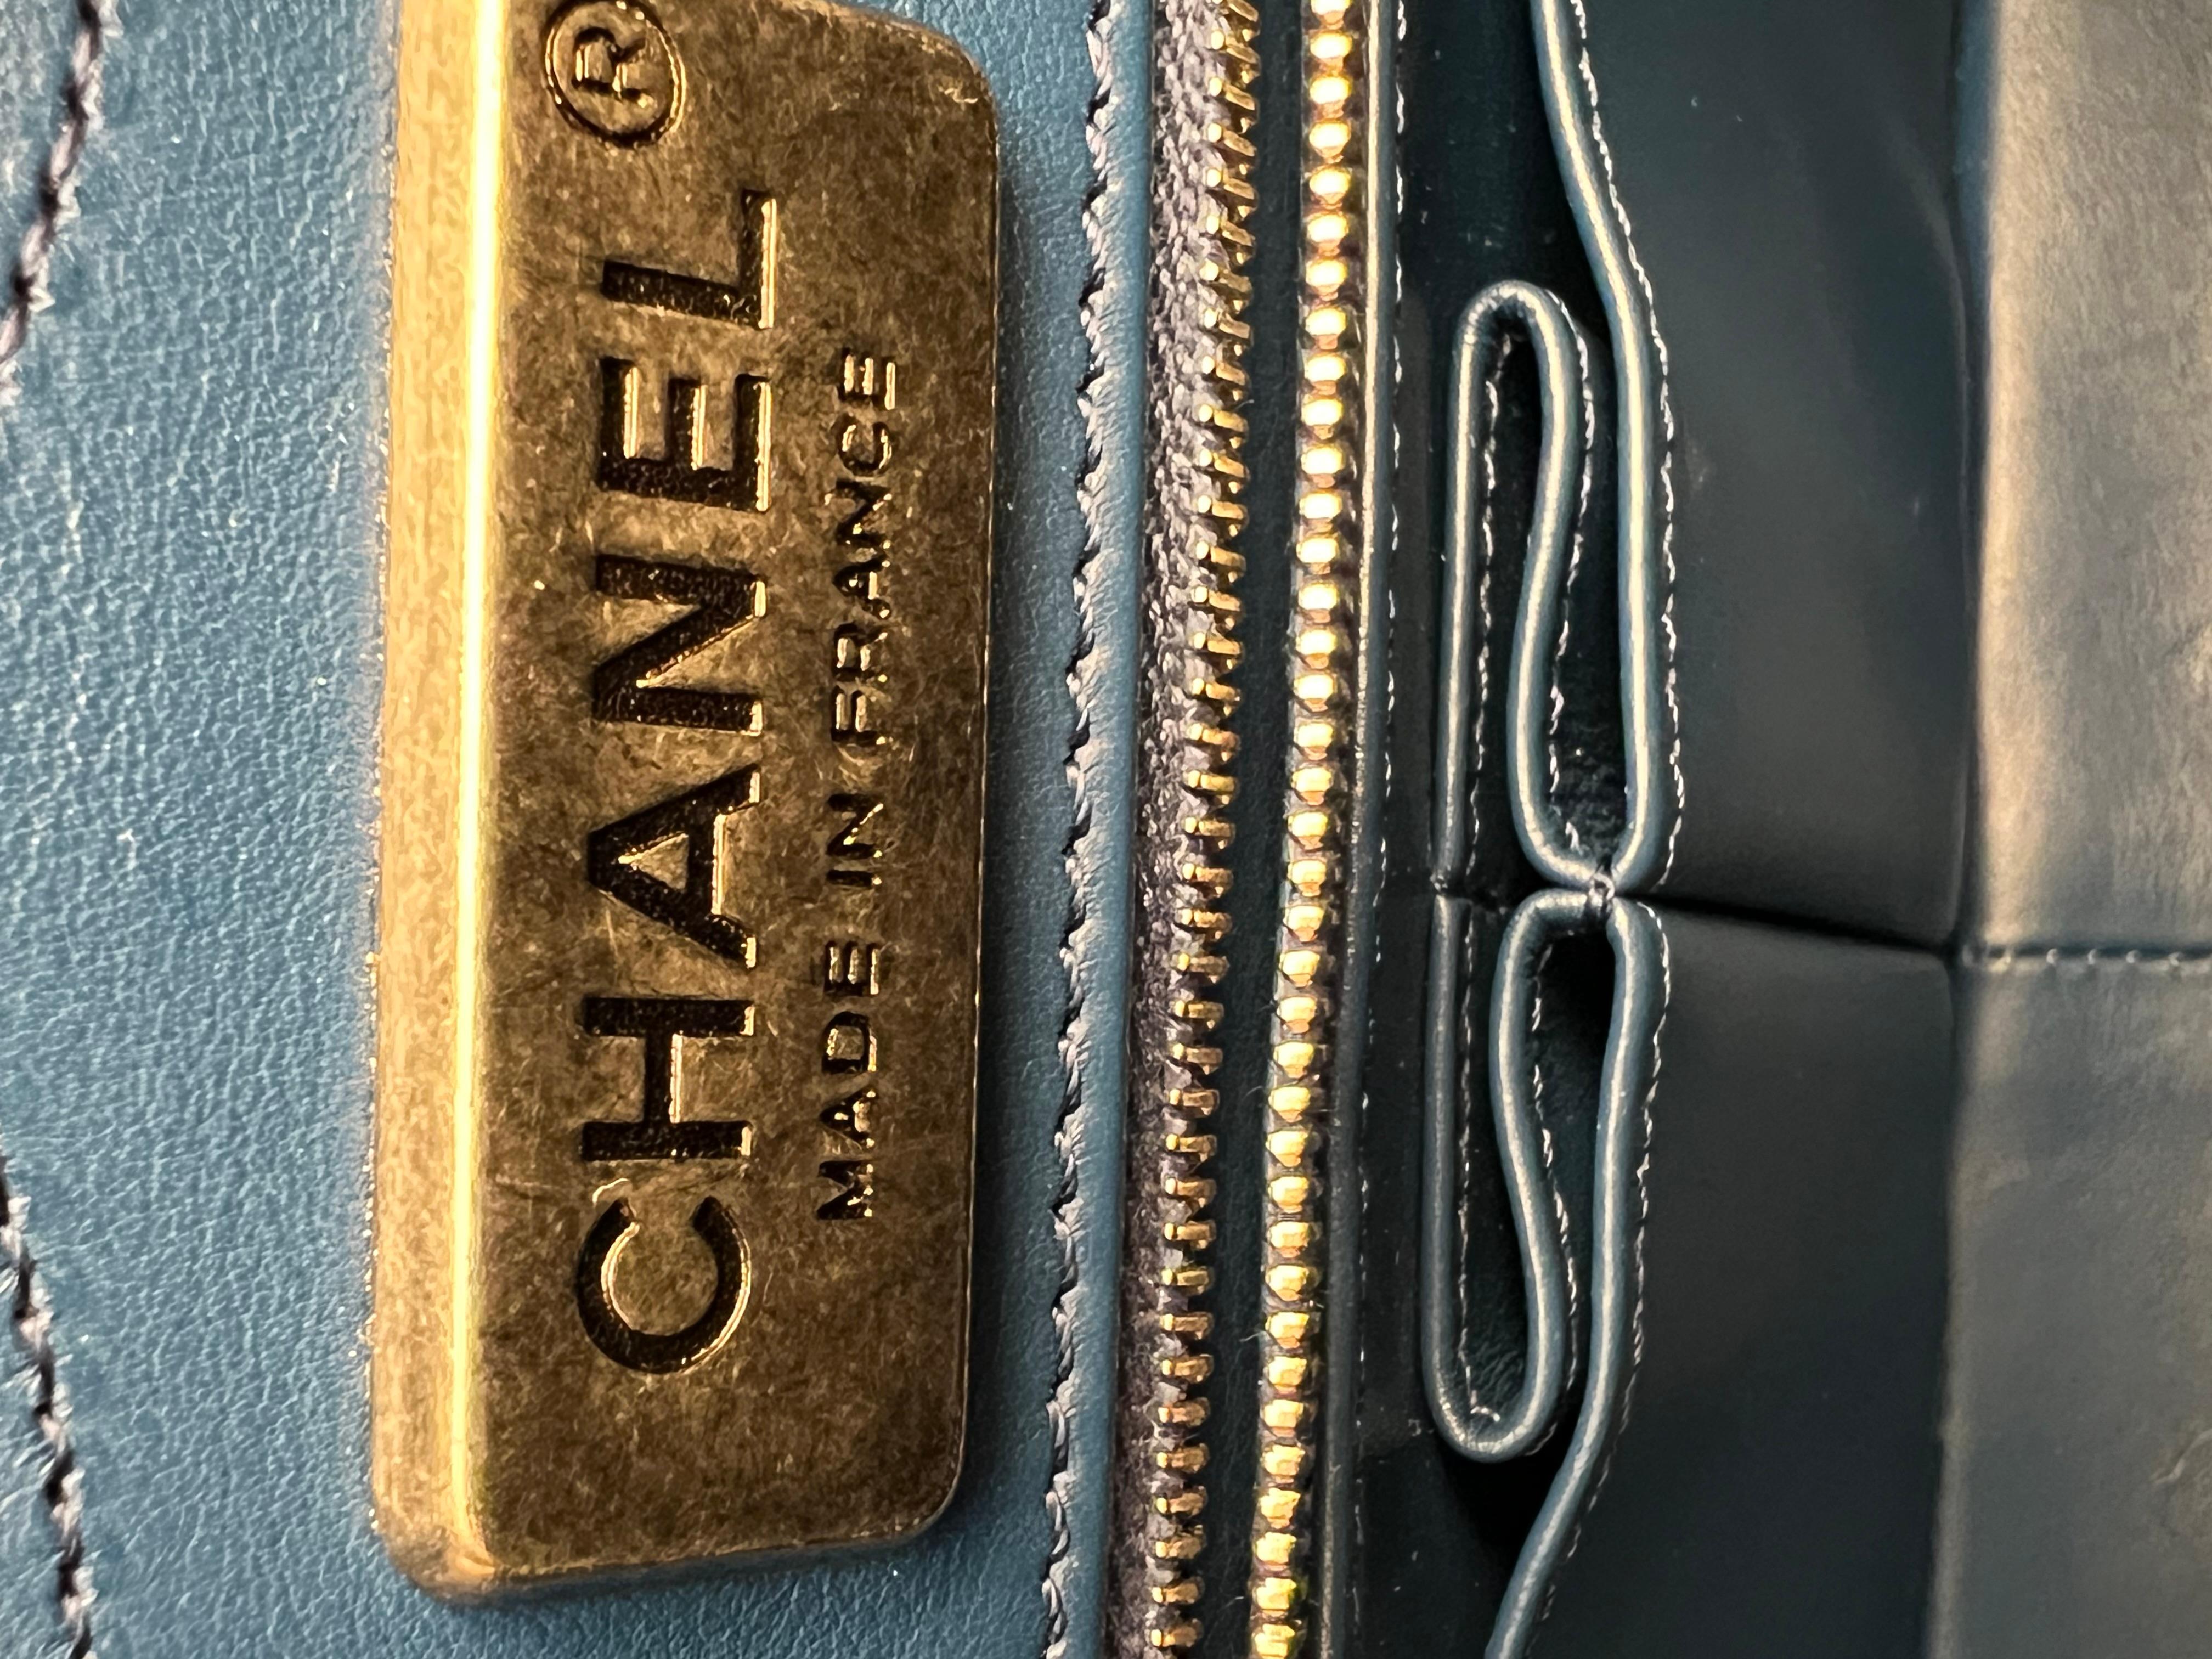 Chanel Blue Shiny Alligator 2.55 Reissue 226 Double Flap Ruthenium Hardware, 2012 year.
The interior is lined in a tonal lambskin leather
Includes dust bag, and box. Bag is in good condition. 
